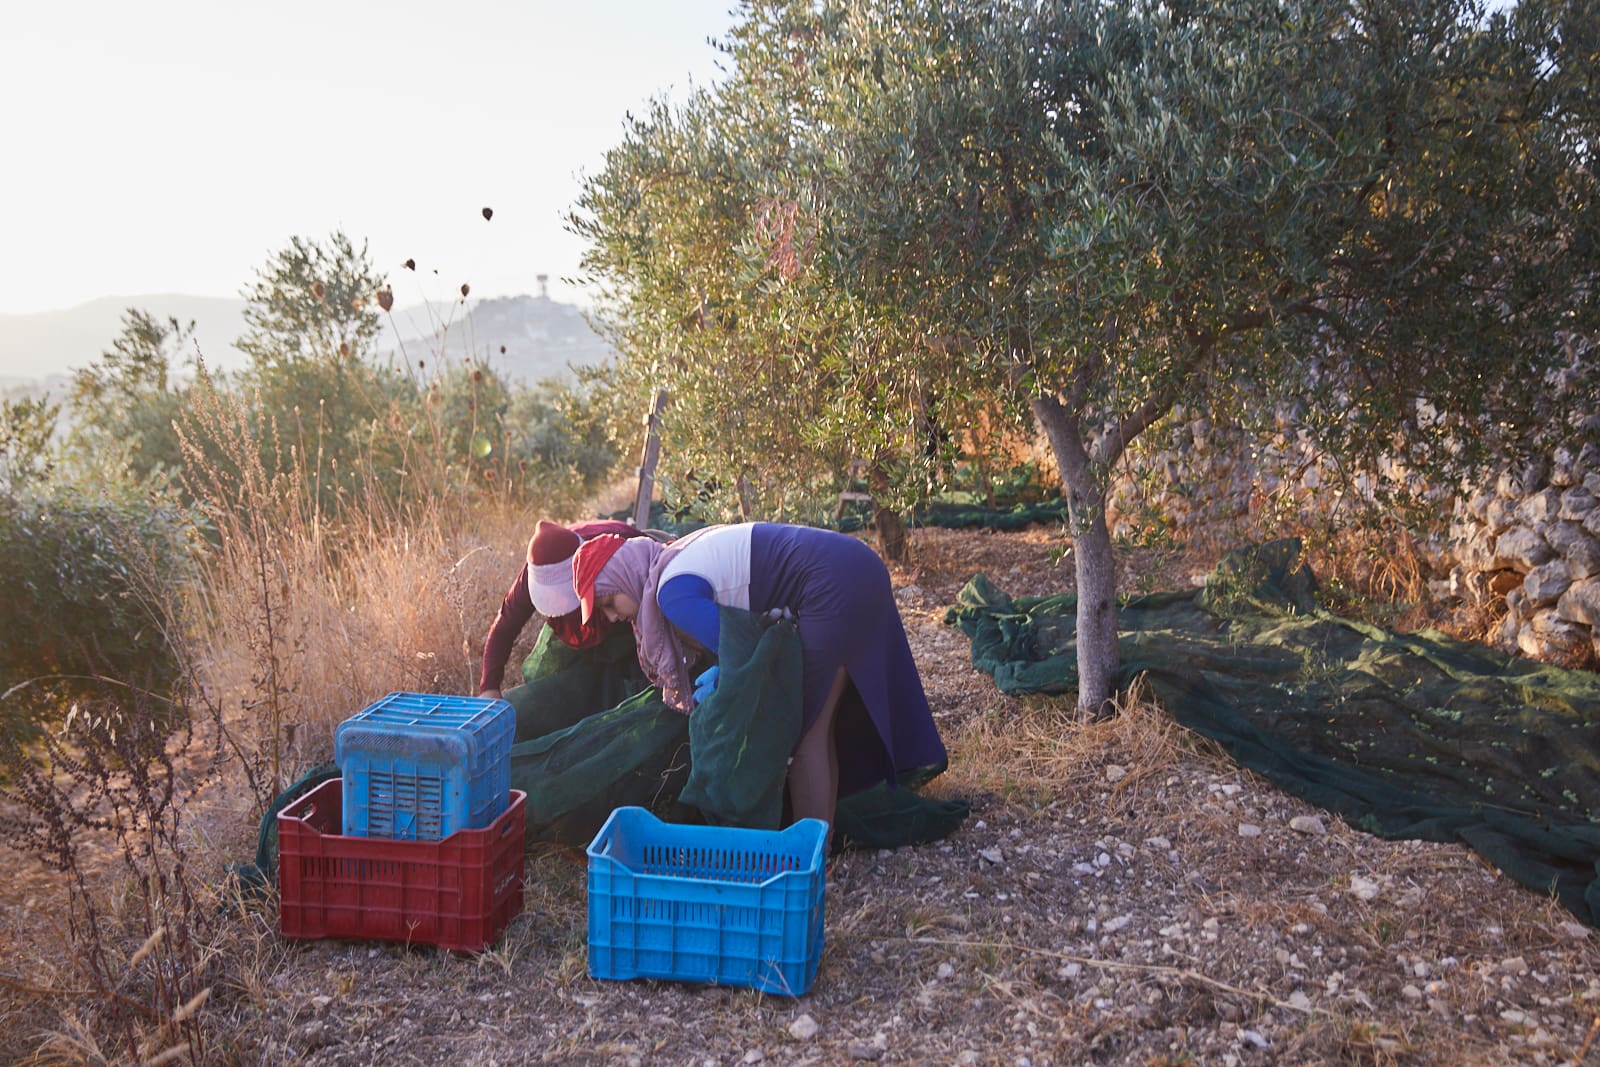 africa-middle-east-profiles-the-best-olive-oils-modern-techniques-and-ancient-groves-a-winning-combination-for-solar-olives-olive-oil-times